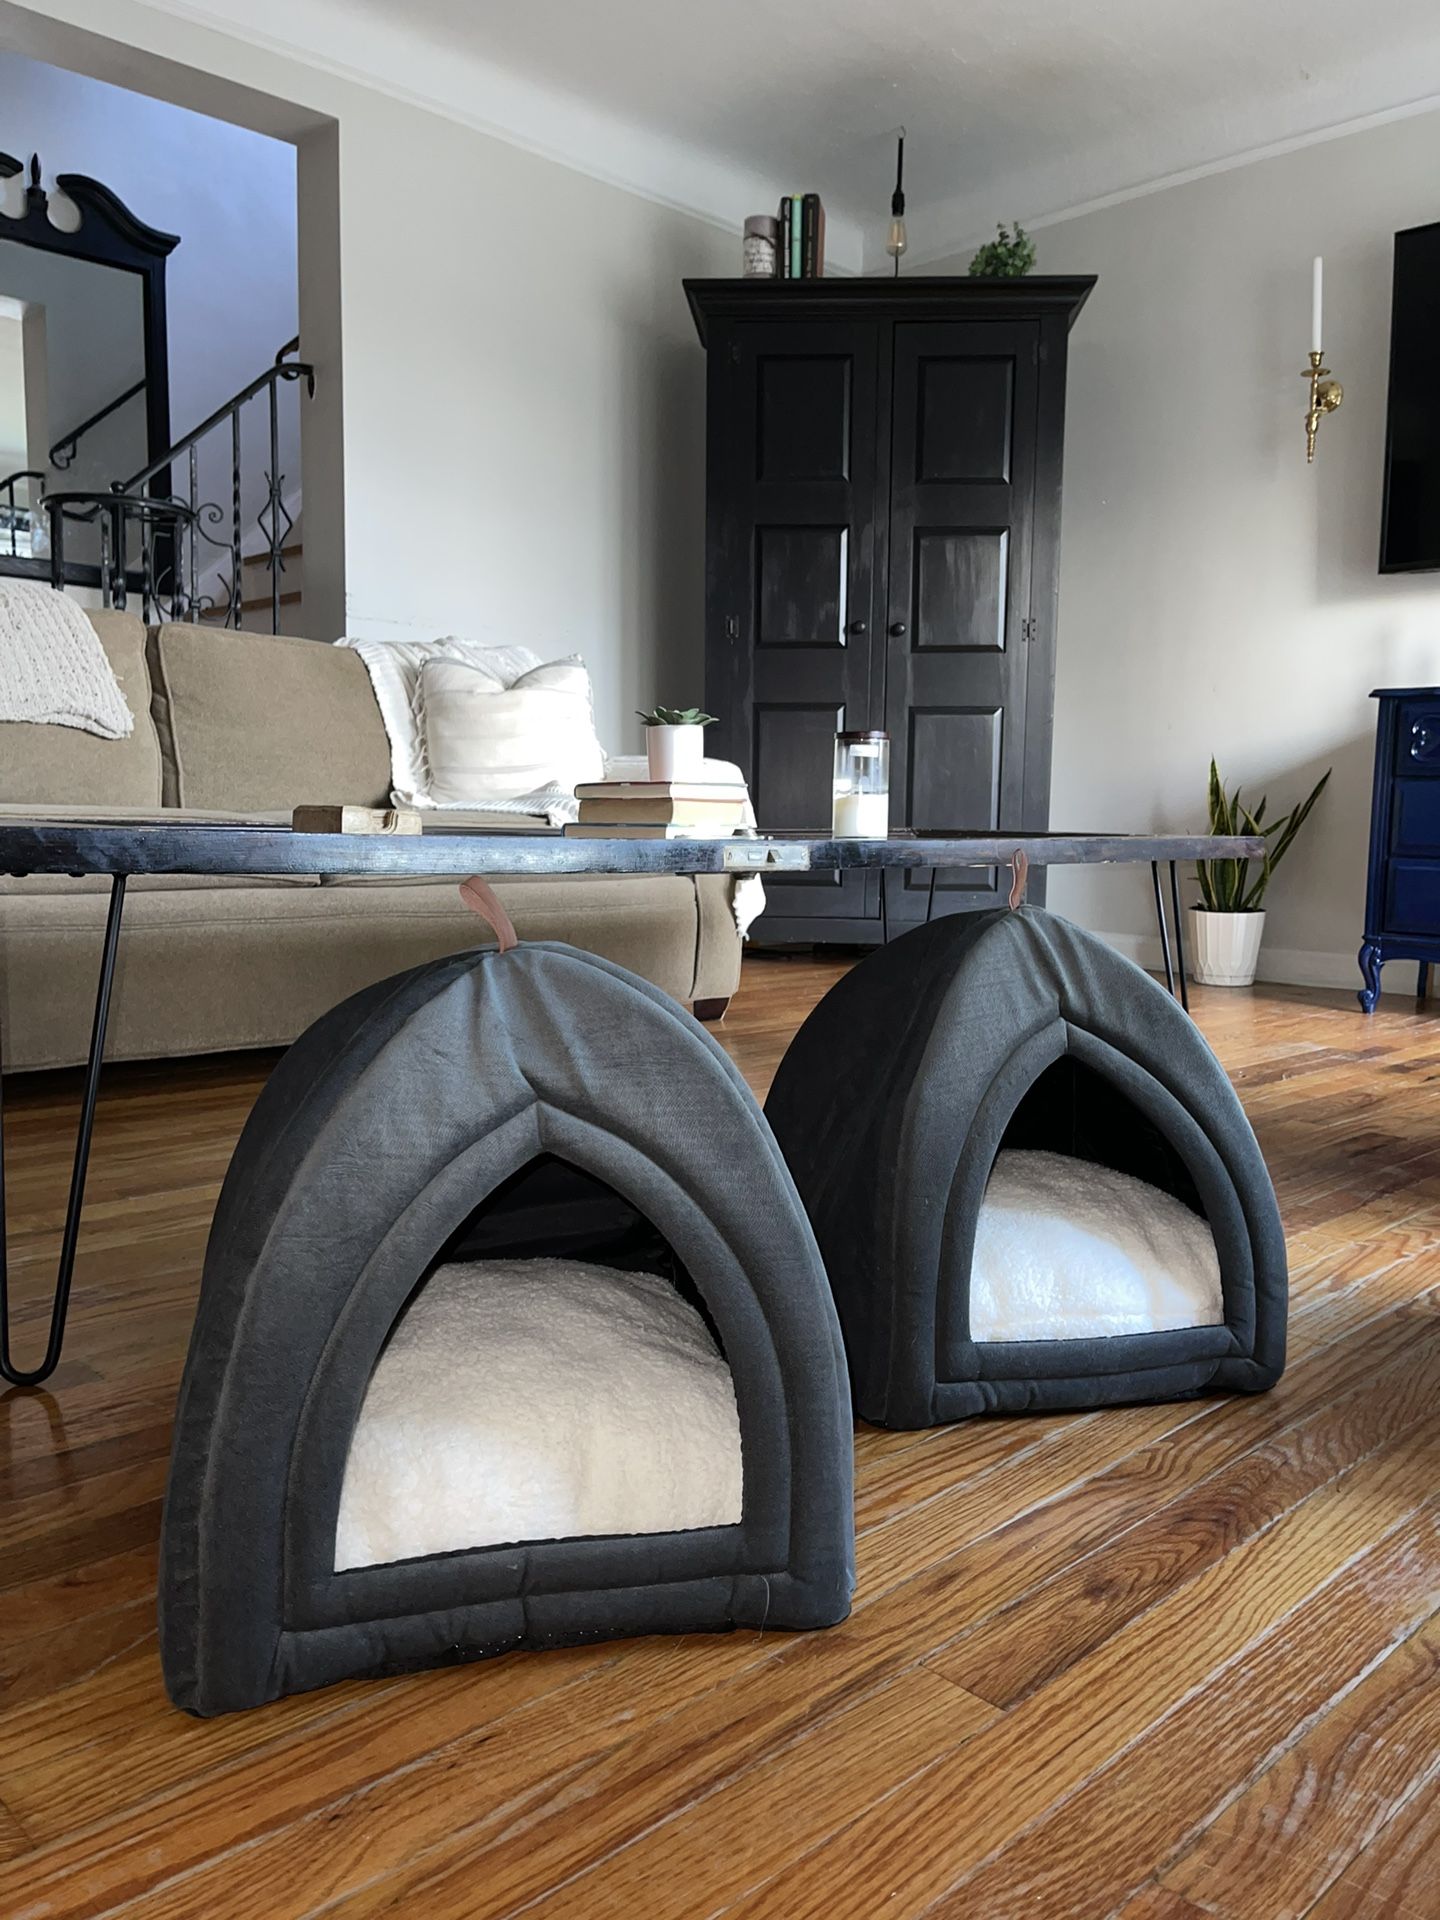 Two Cat Bed Tent/huts For cats/kittens By Bedsure